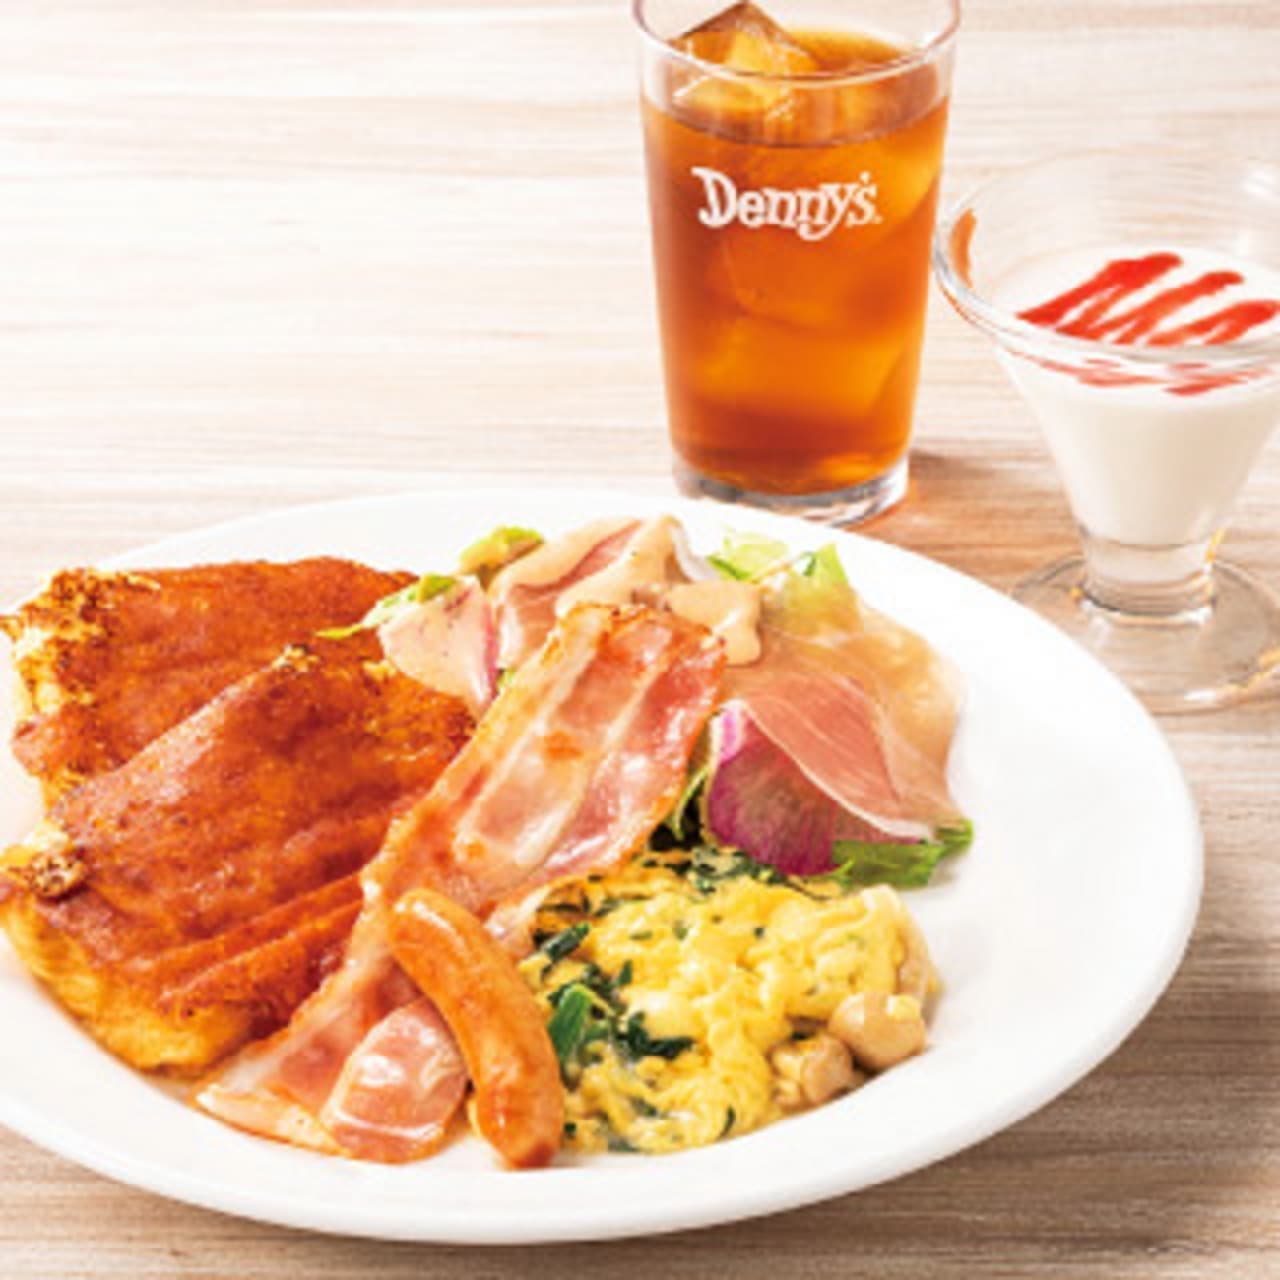 Denny's "Scrambled Eggs & Cheese French Toast"